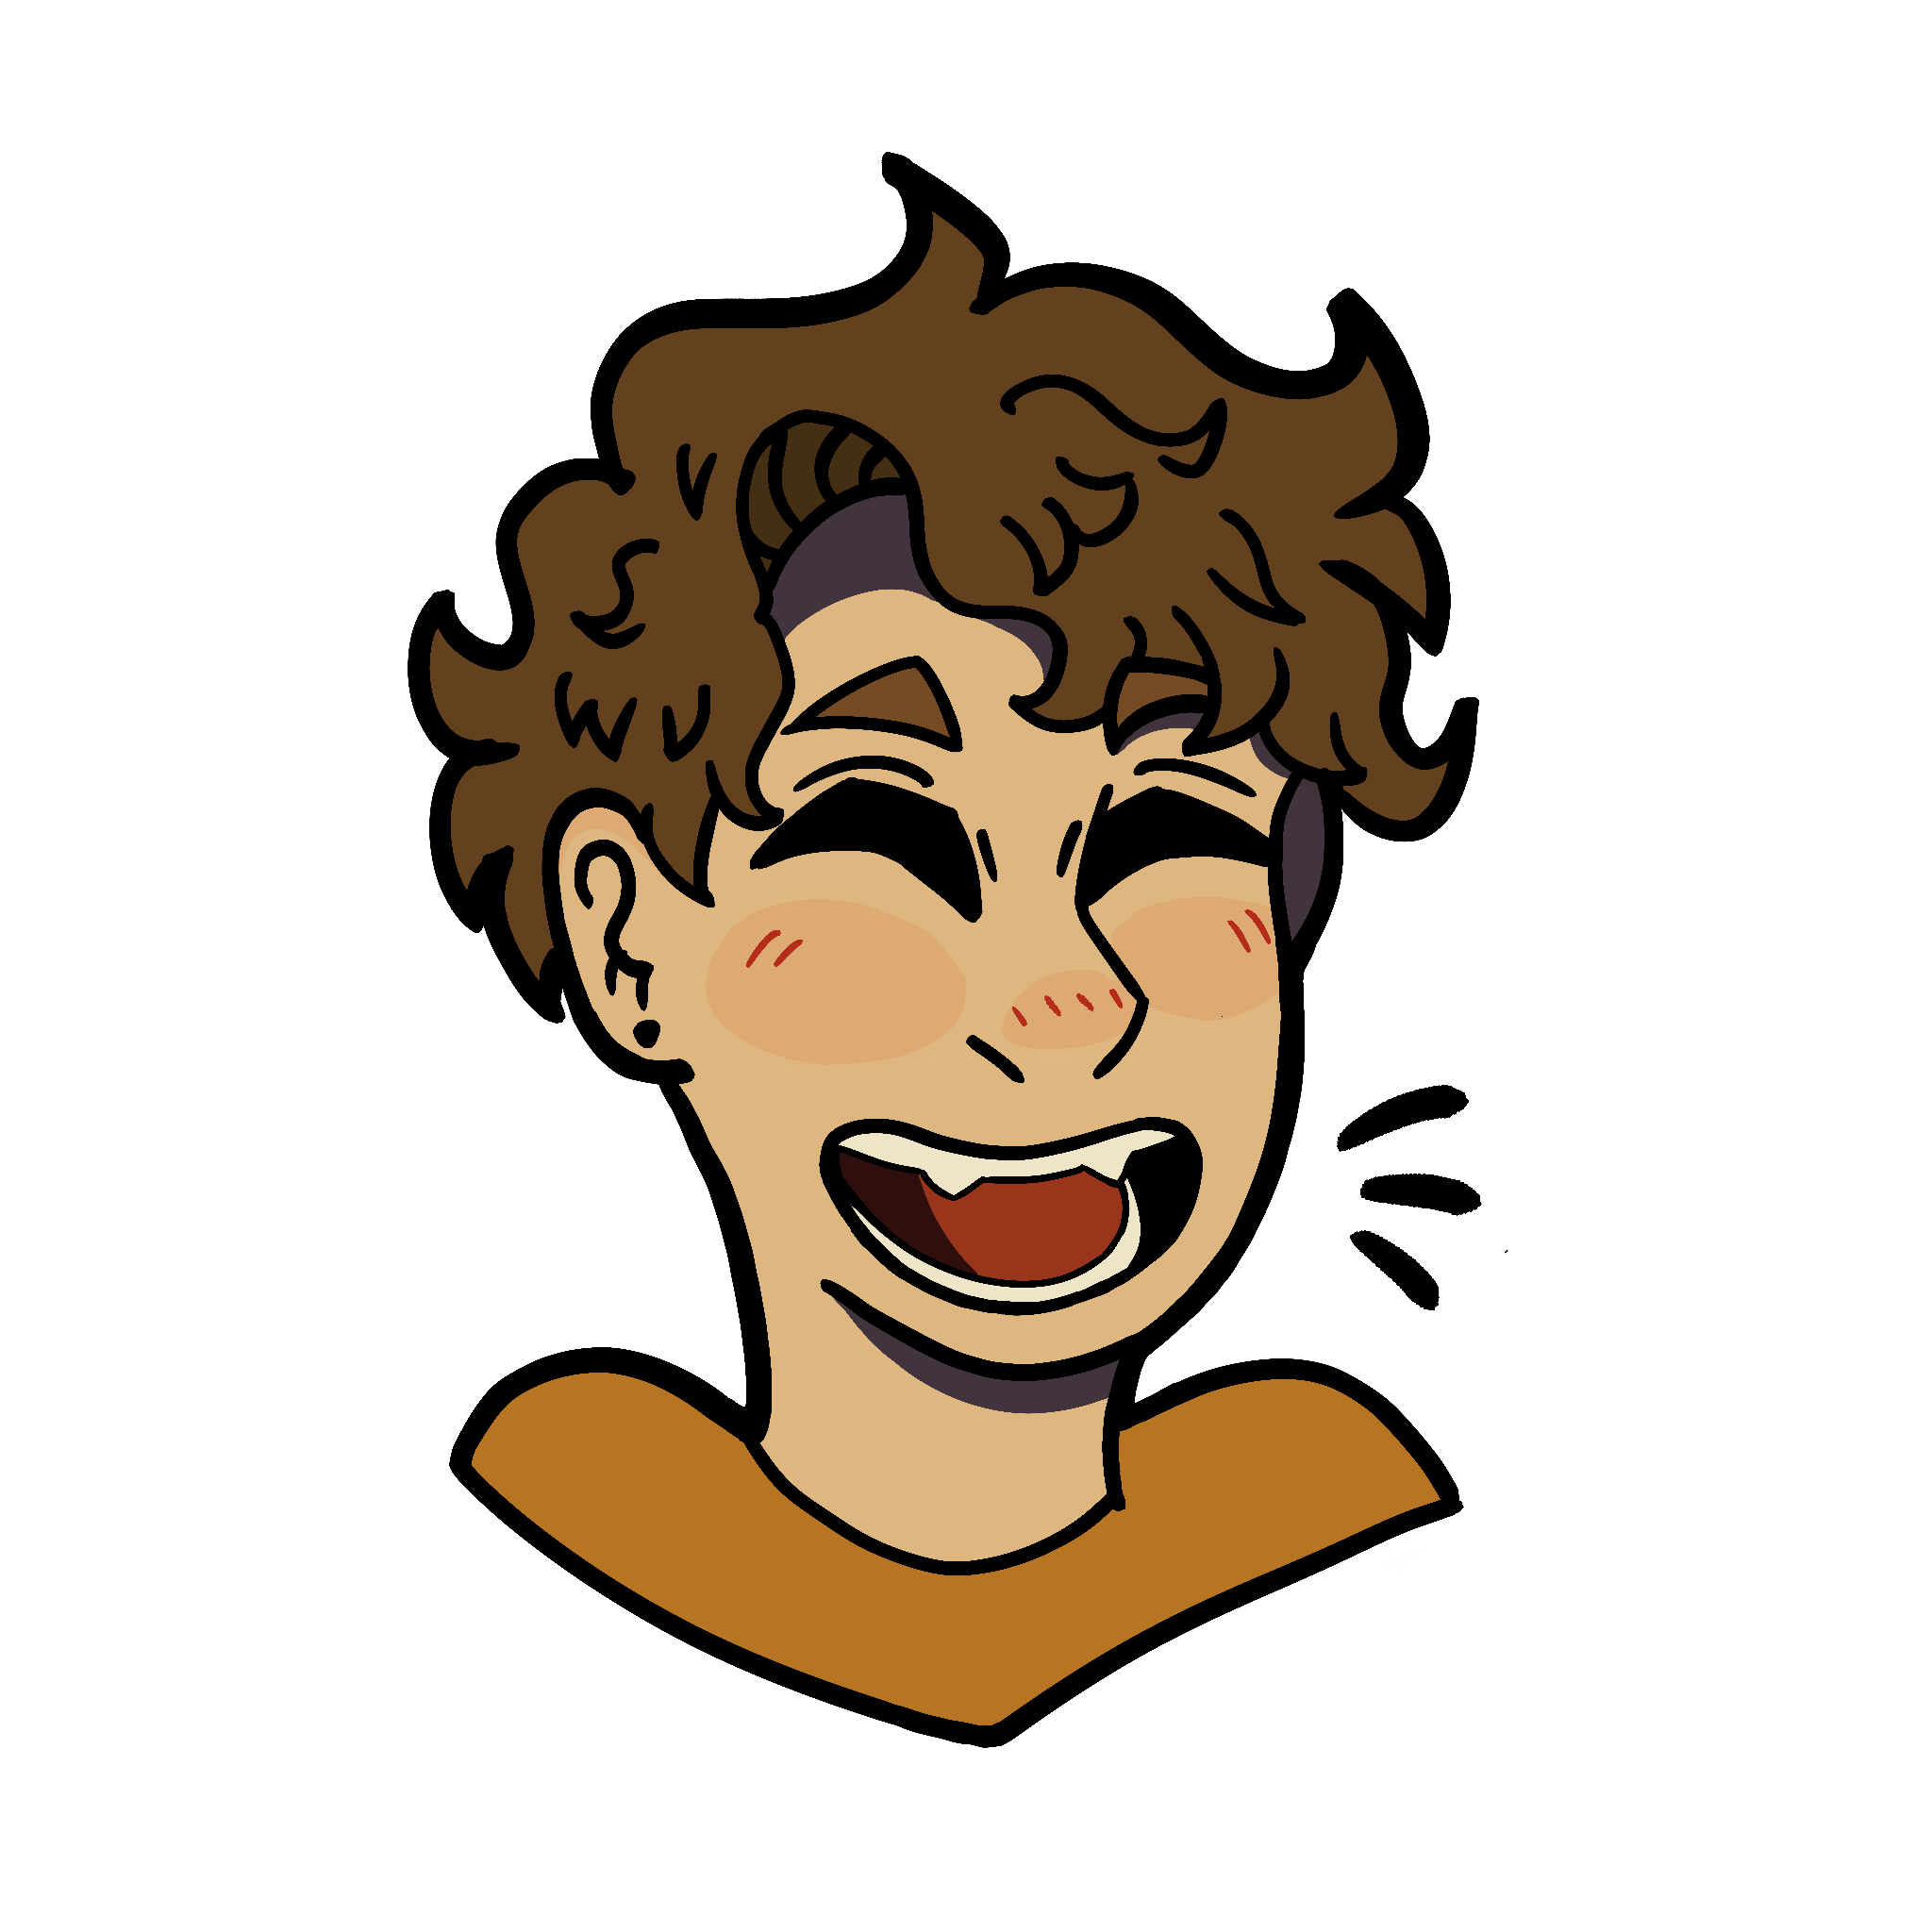 Profile picture I did for myself